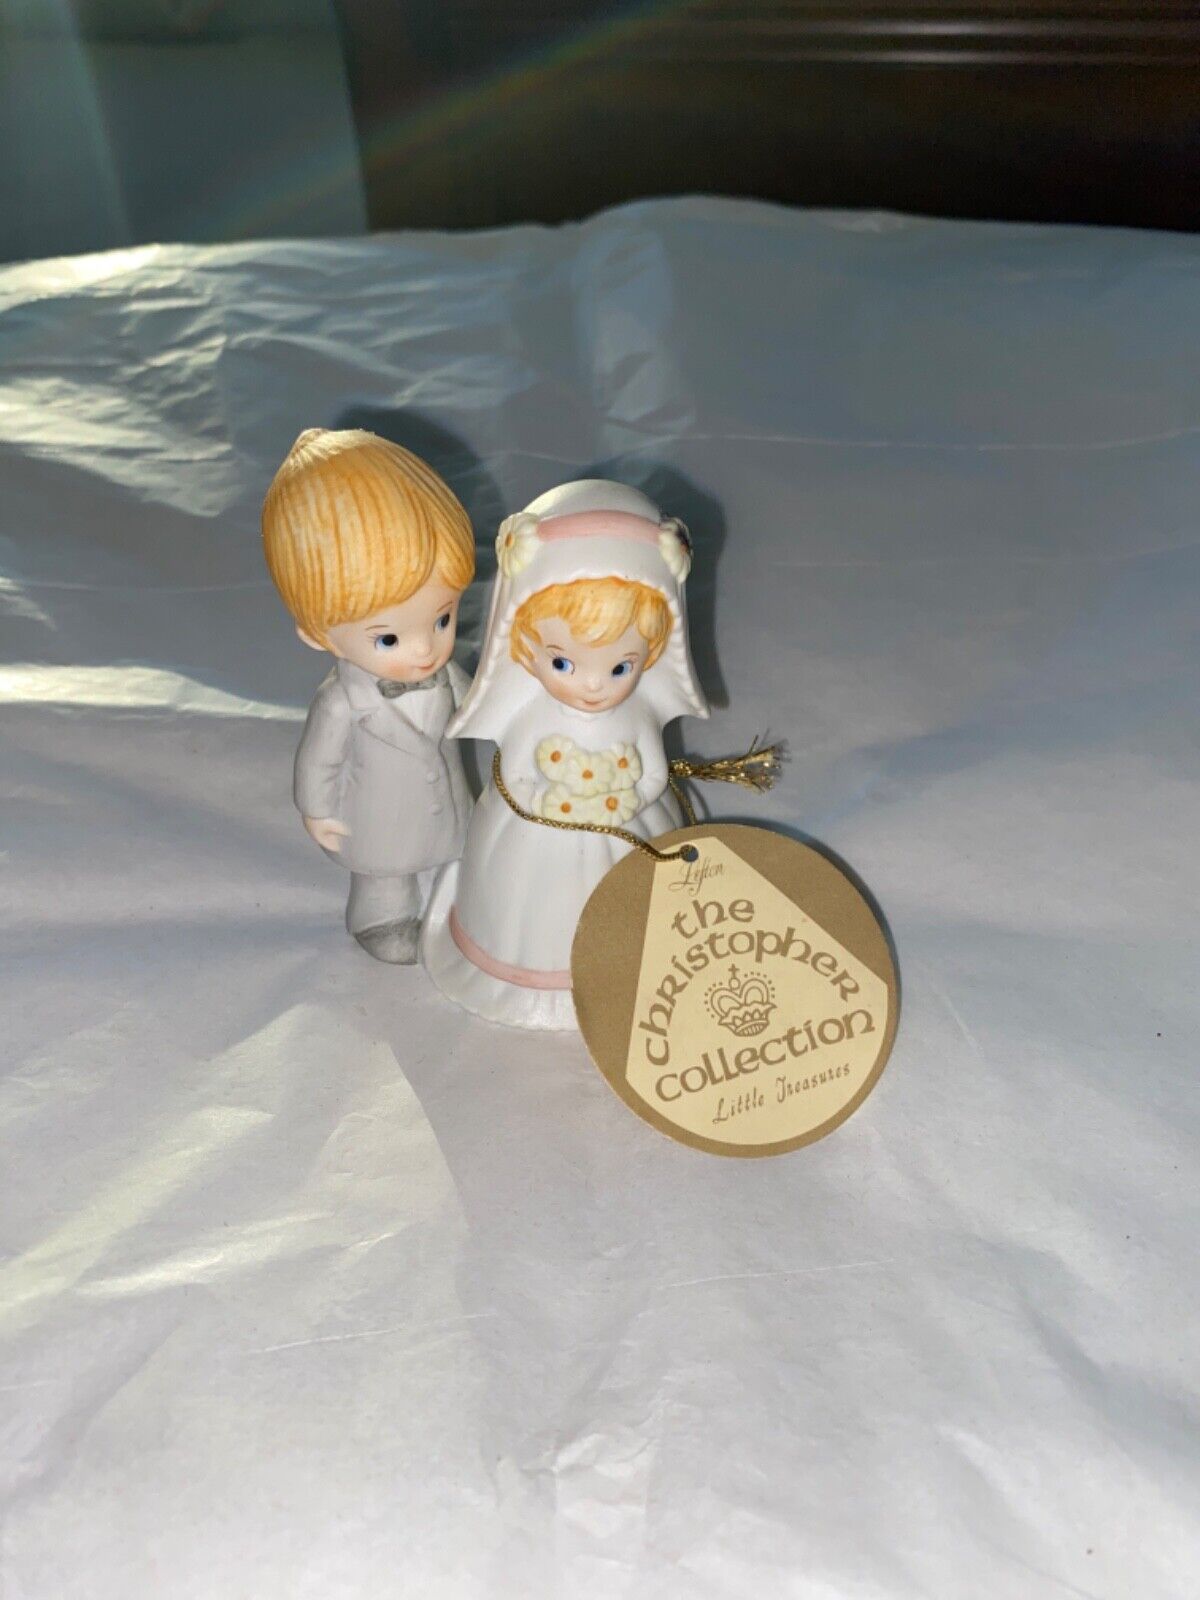 Vtg 3.5” Lefton Bride and Groom Figurine/Cake Topper 04466 W/ Daisies 1970/80s